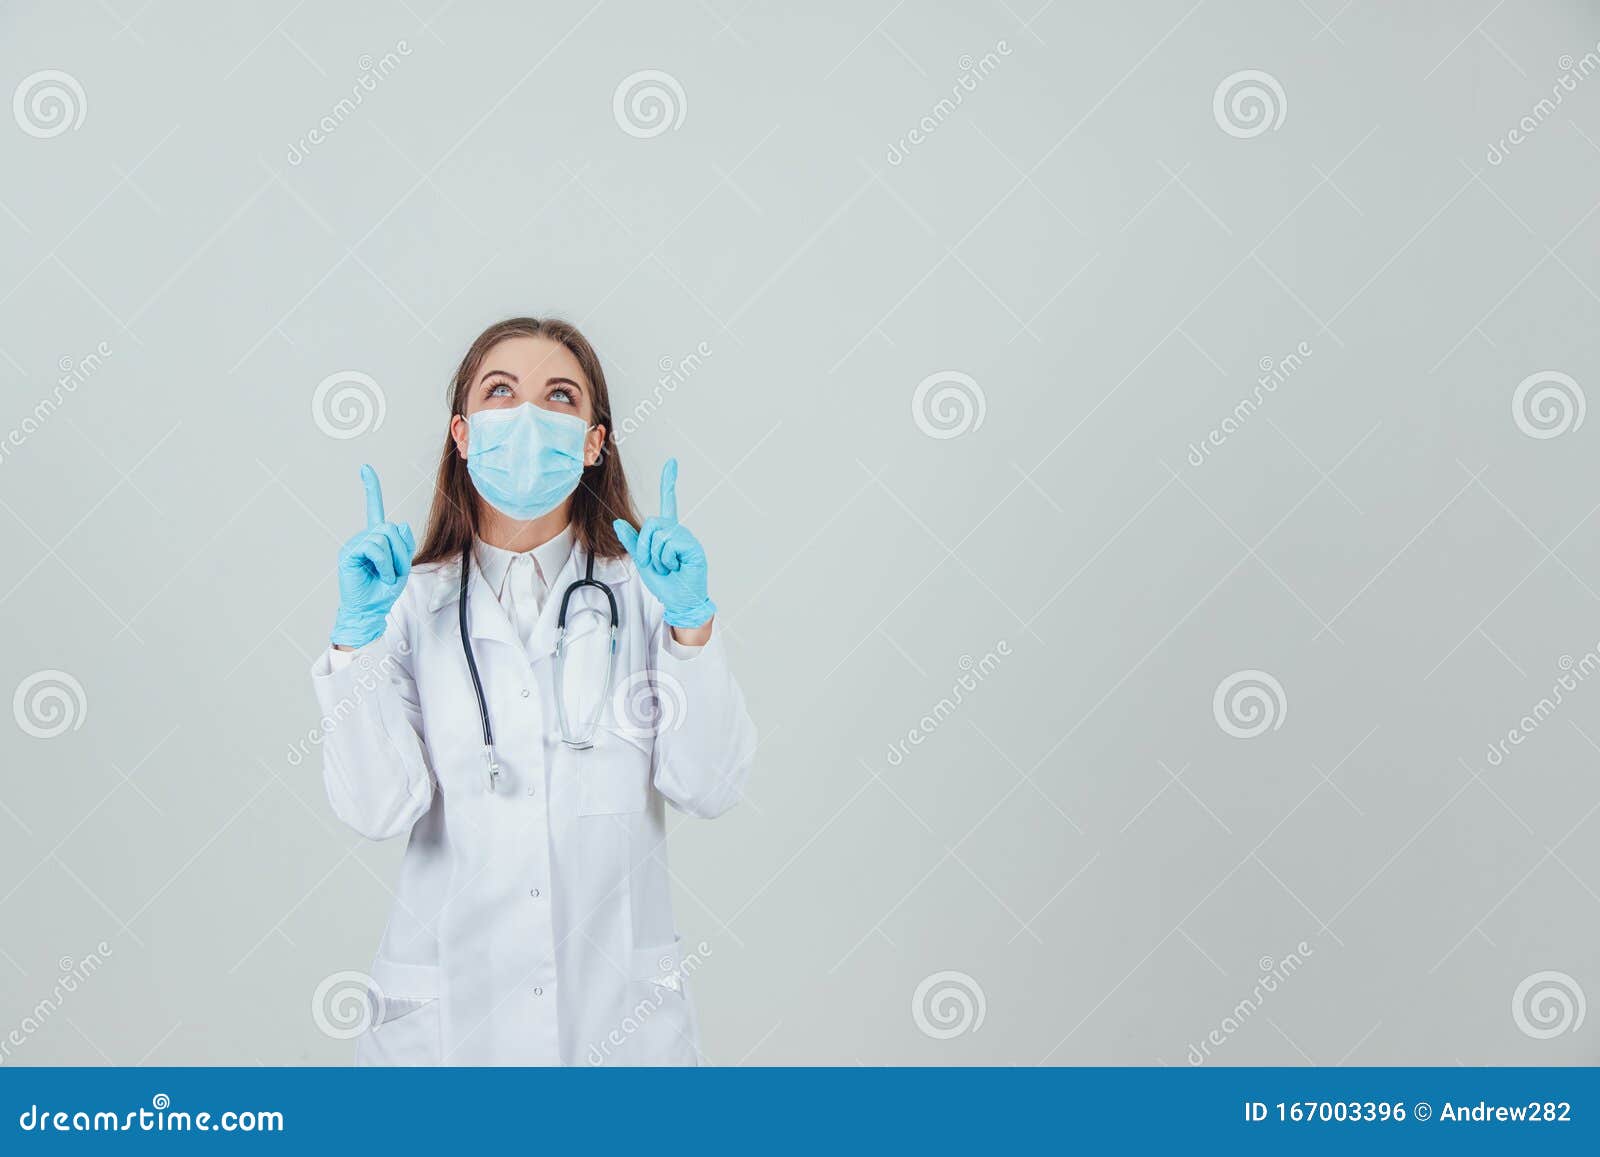 portrait of a young doctor in medical mask, on sterile gloves and with stethoscope, pointing her fingers up.